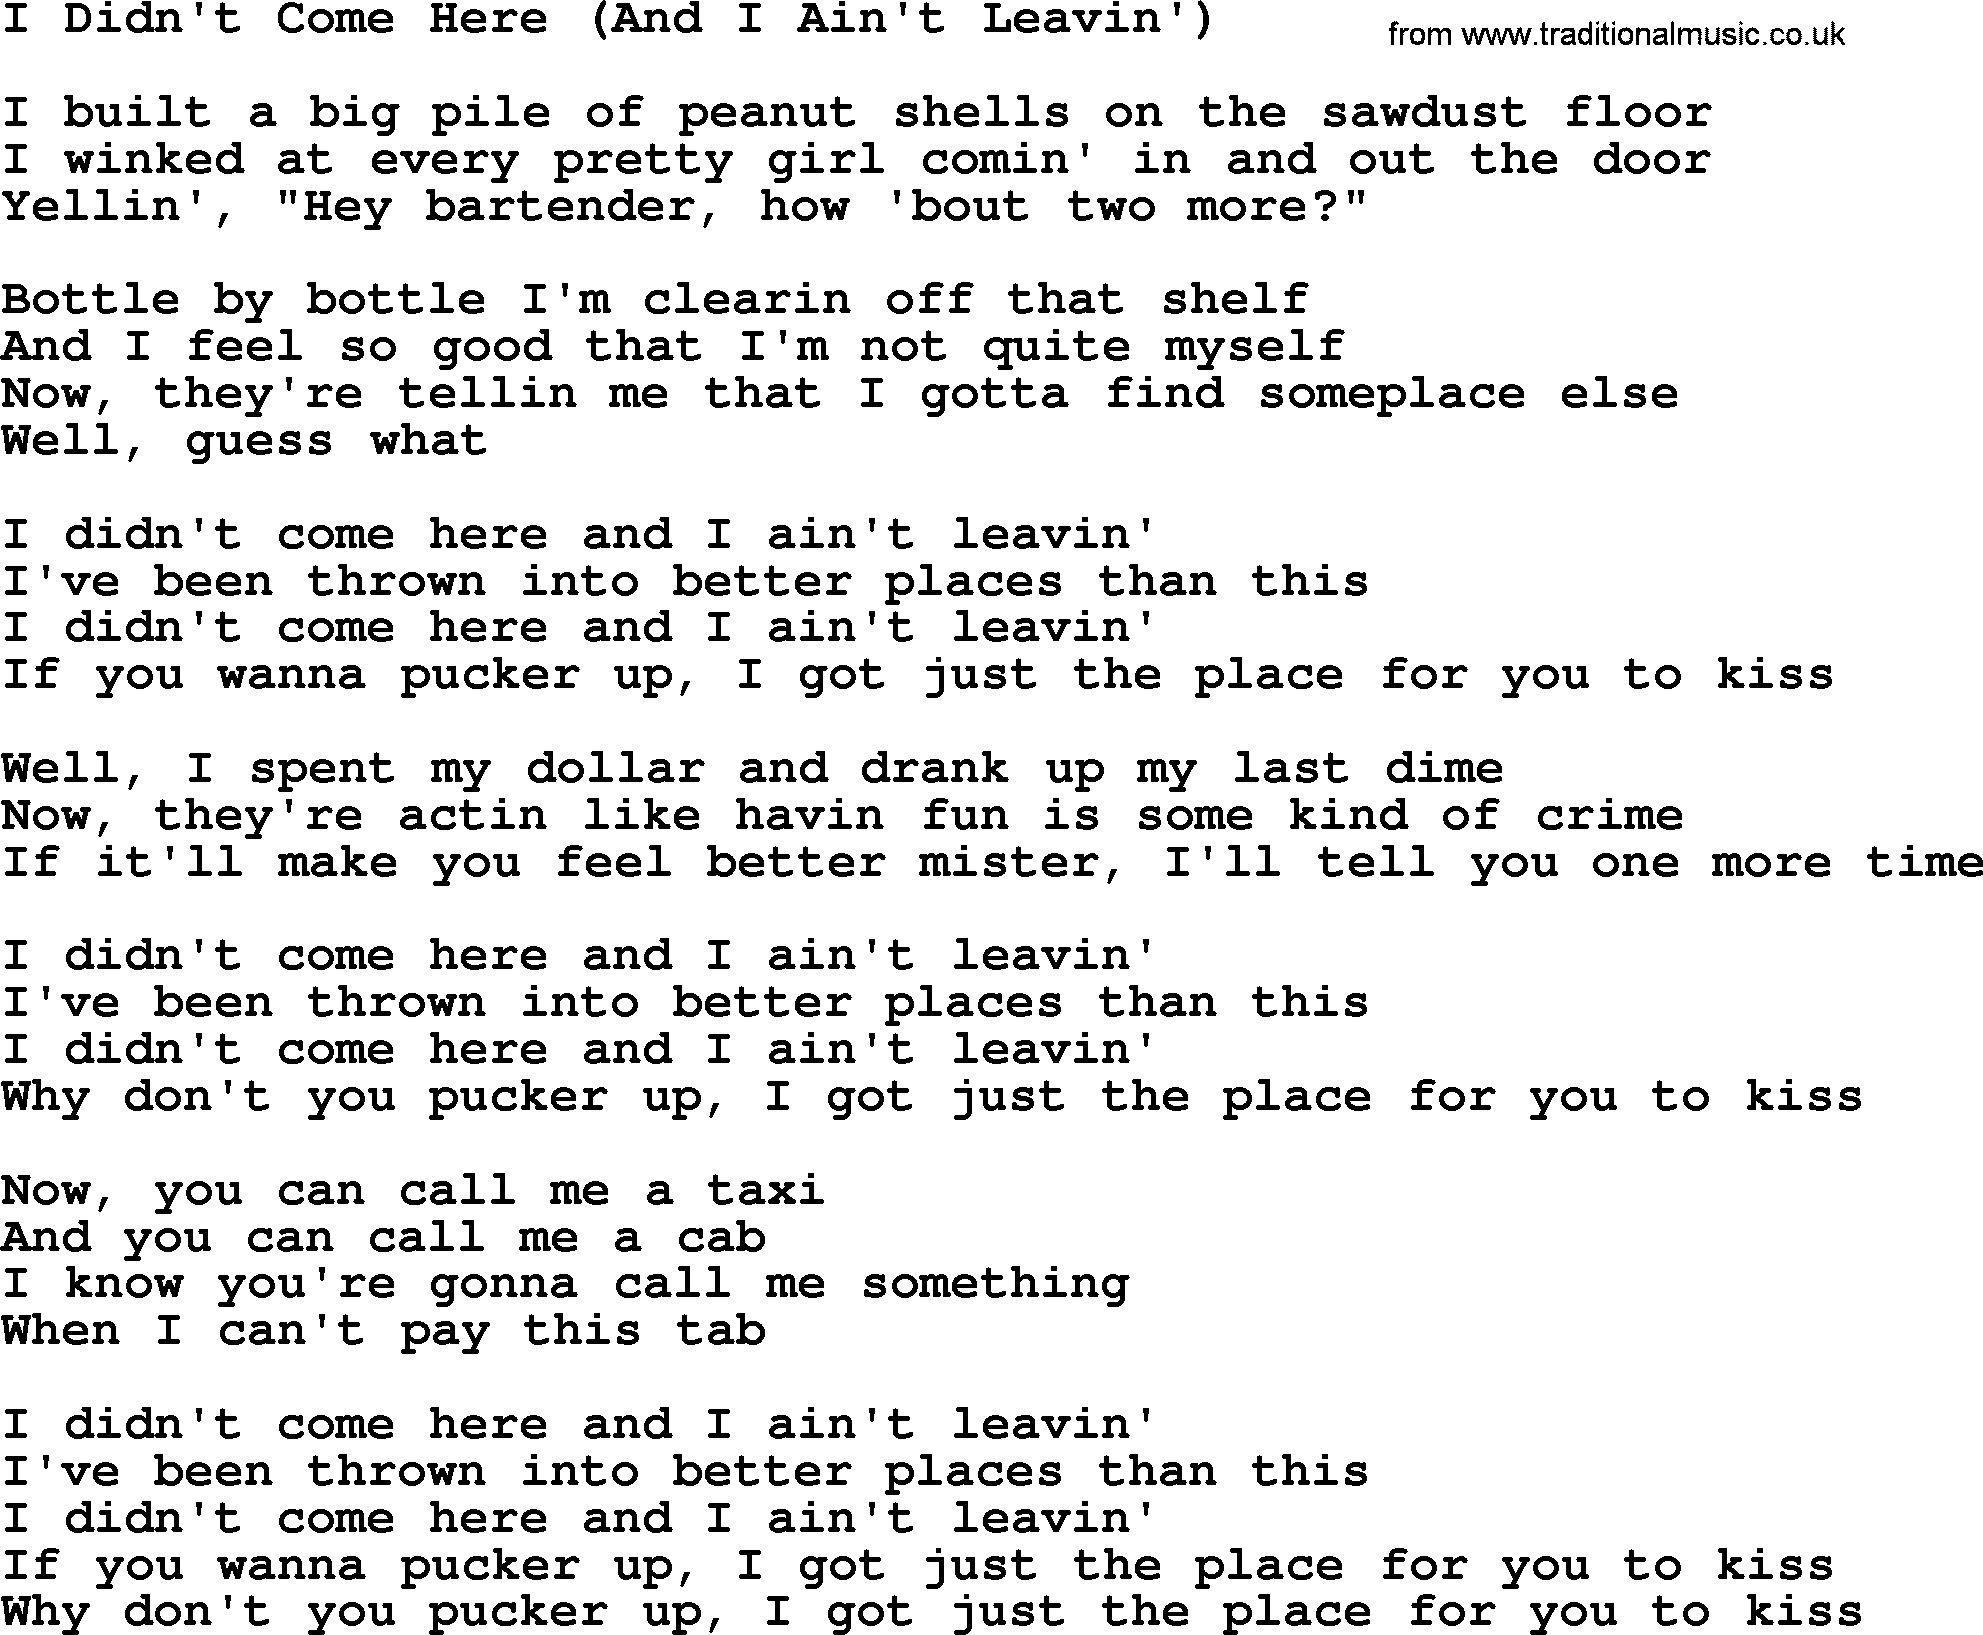 Willie Nelson song: I Didn't Come Here (And I Ain't Leavin') lyrics